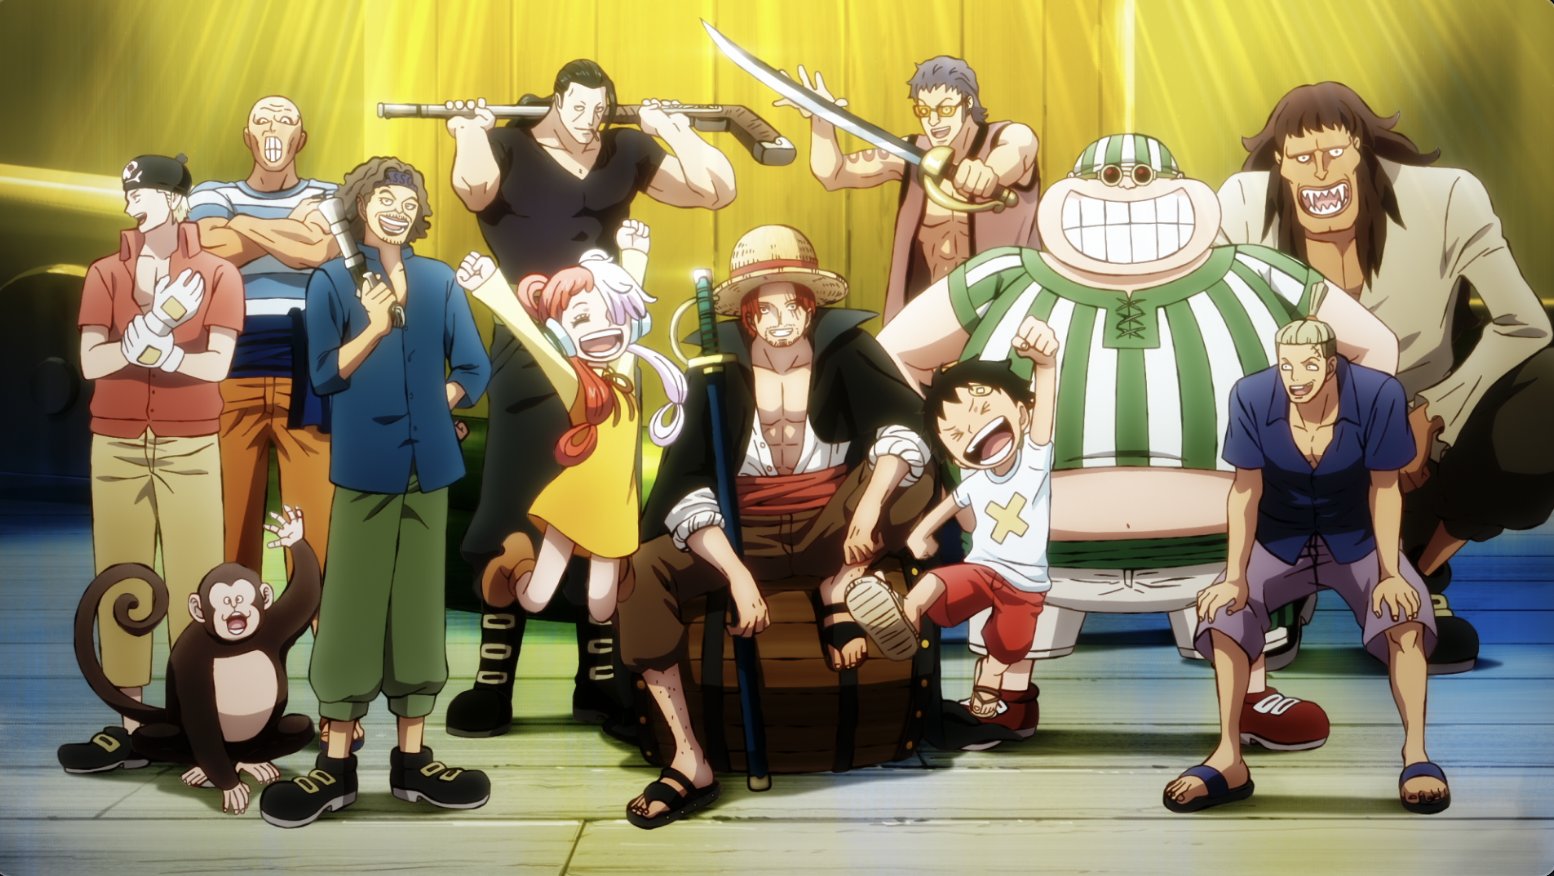 Toei Animation - At any cost. #OnePiece1028 Streaming now on